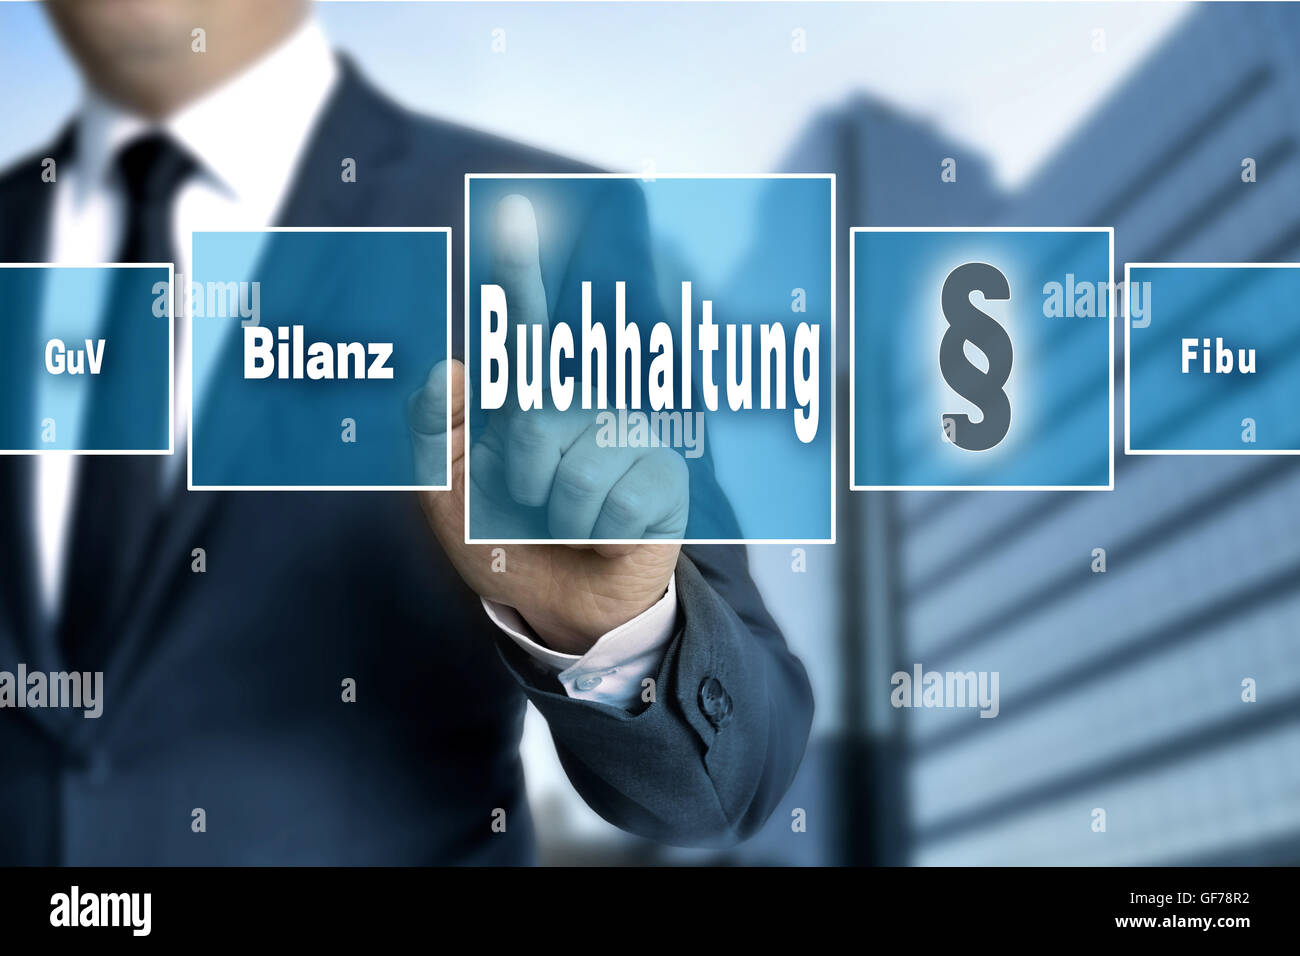 Buchhaltung (in german accounting, balance, financial accounting, profit)  touchscreen concept background. Stock Photo